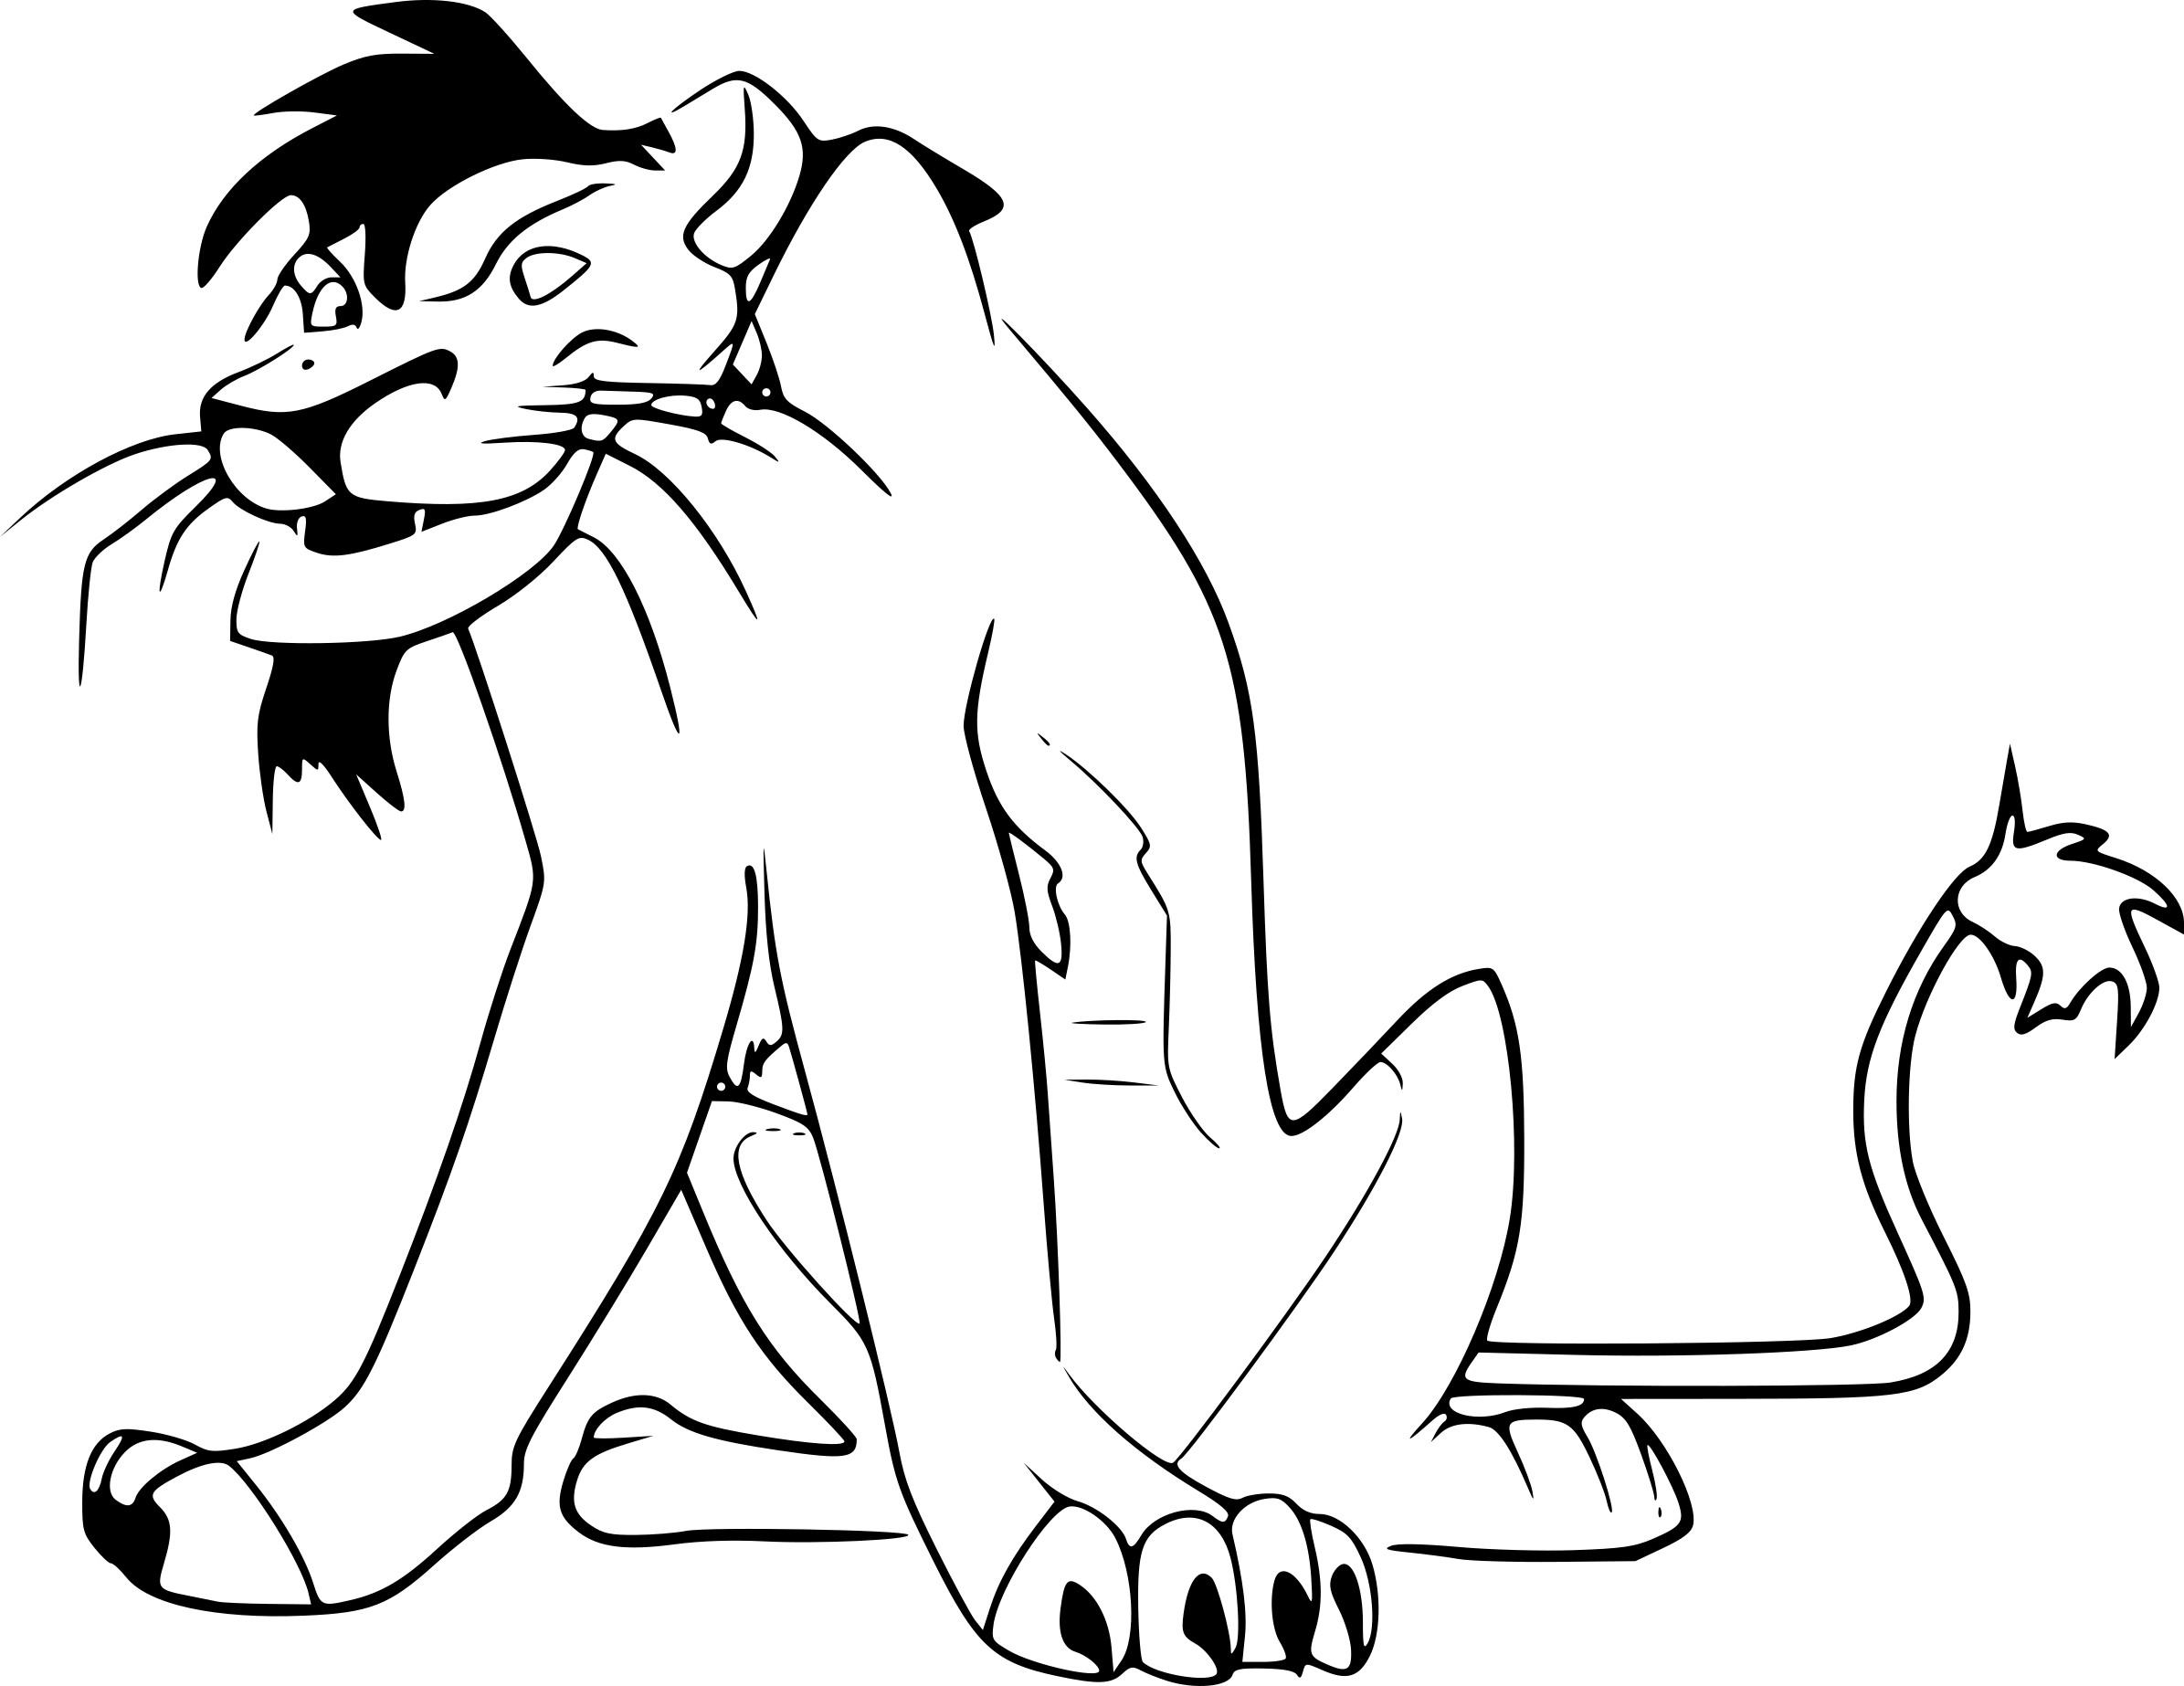 Nuka The Lion King 2 coloring page